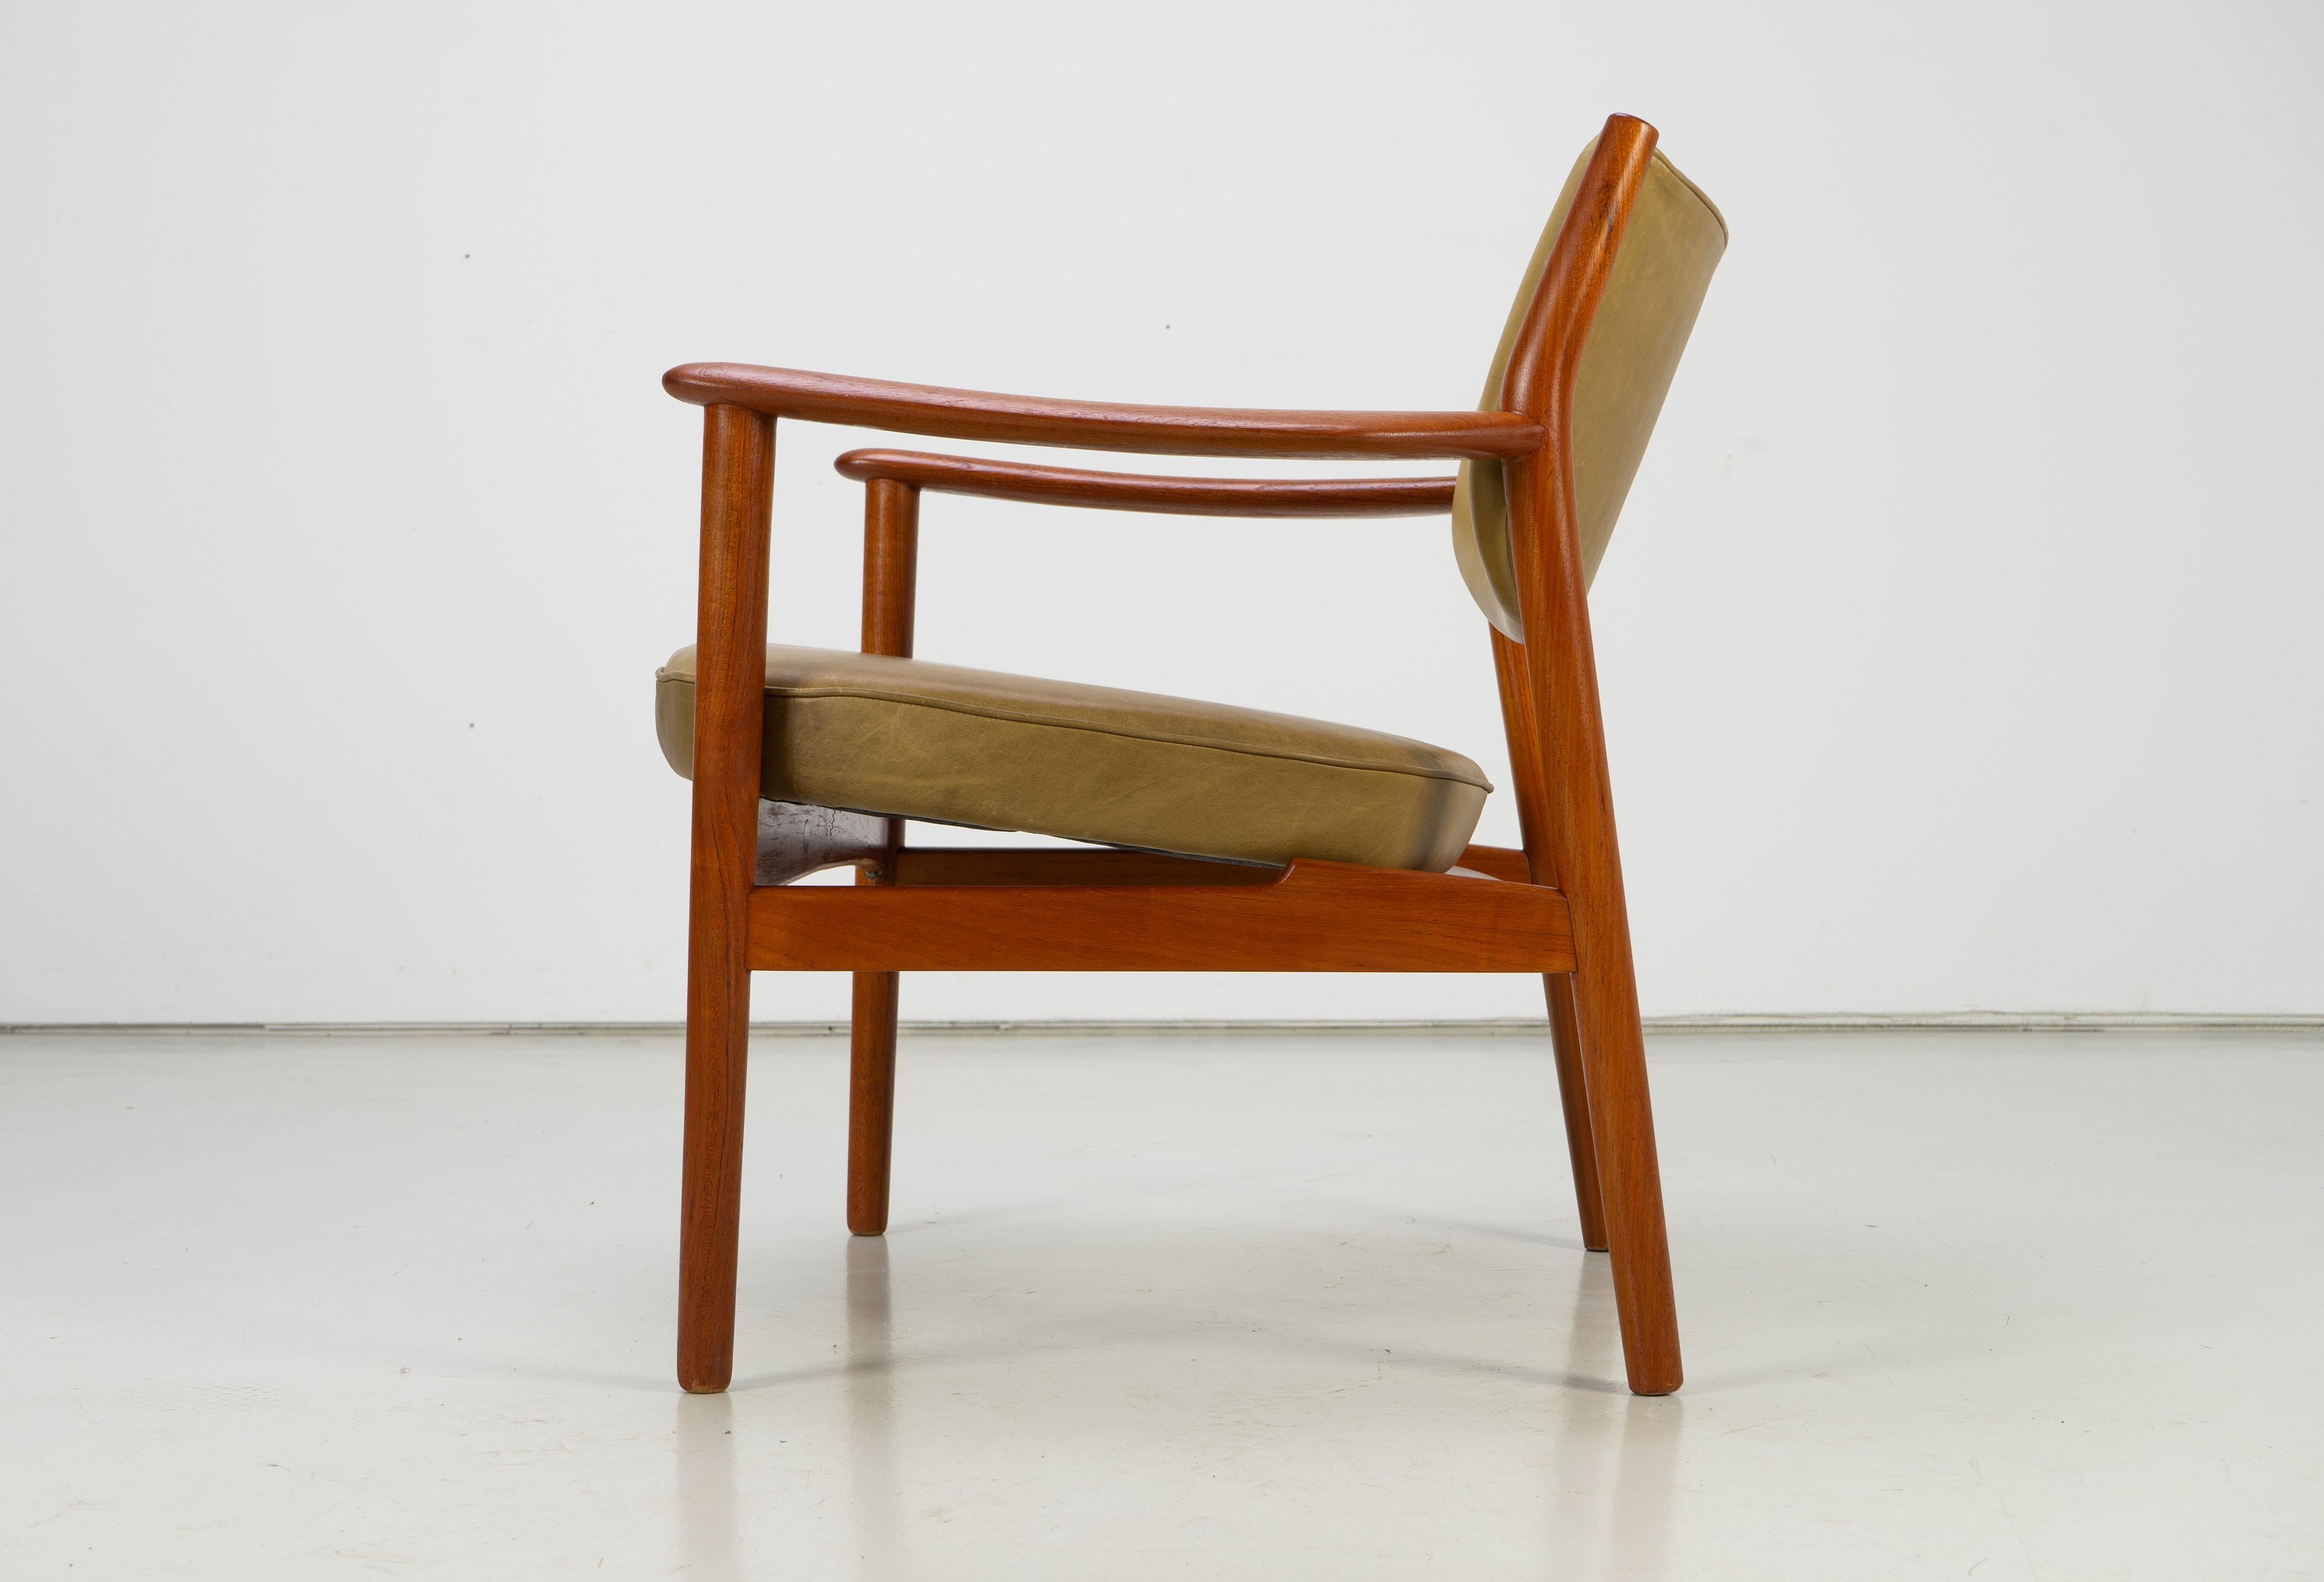 Pair of Scandinavian Easy Chairs with Teak and Leather by Westnofa, 1960s For Sale 4